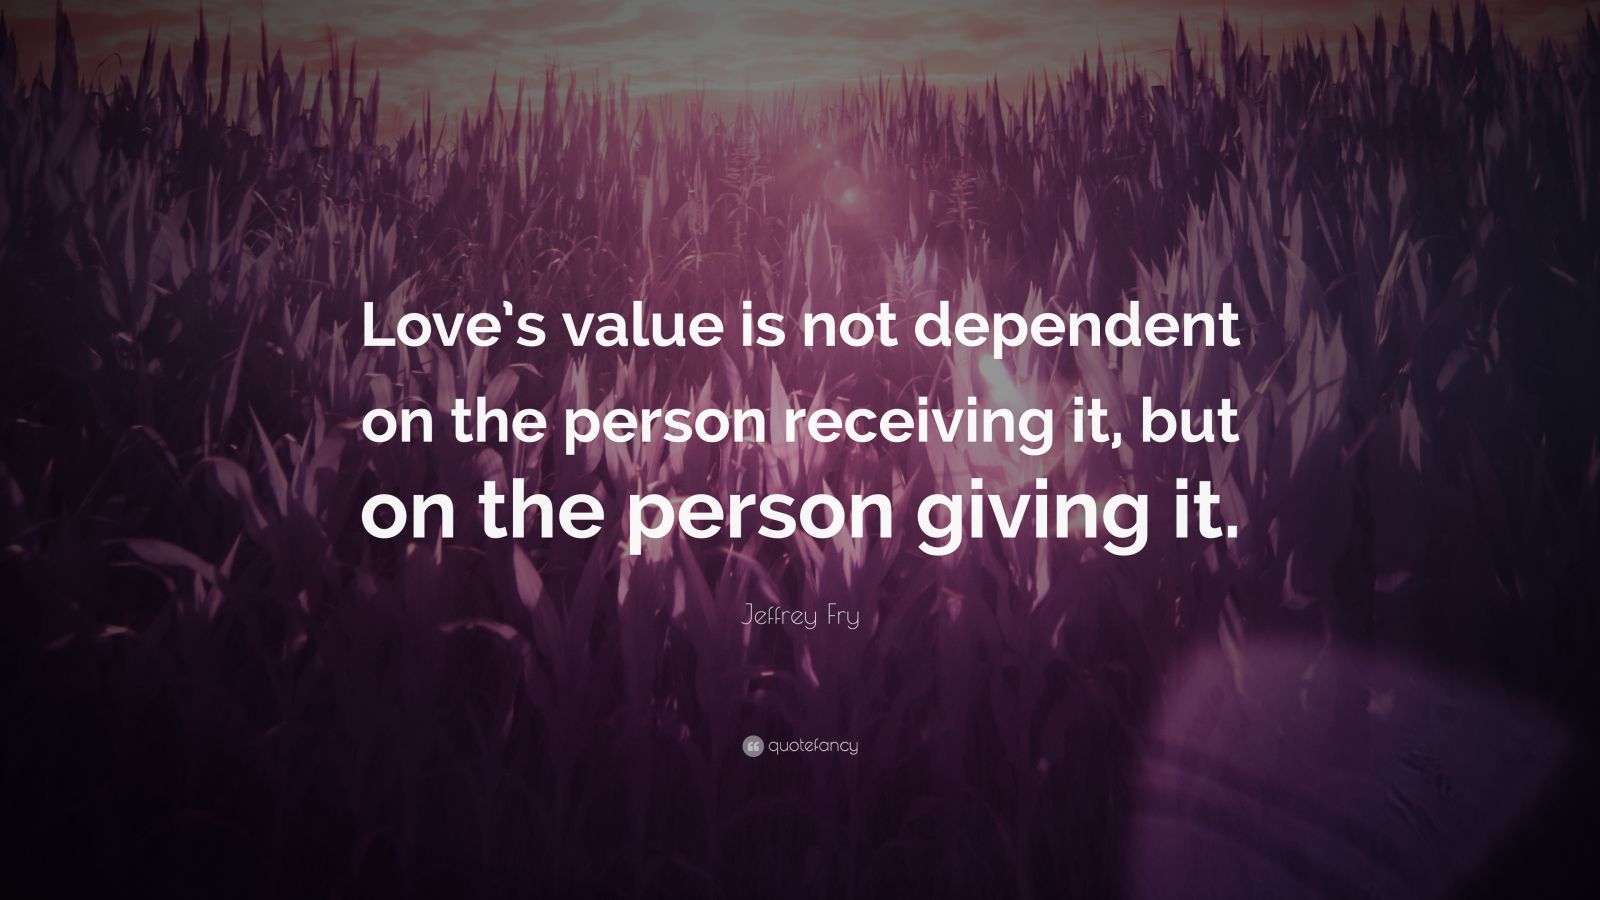 Jeffrey Fry Quote: “Love’s value is not dependent on the person ...